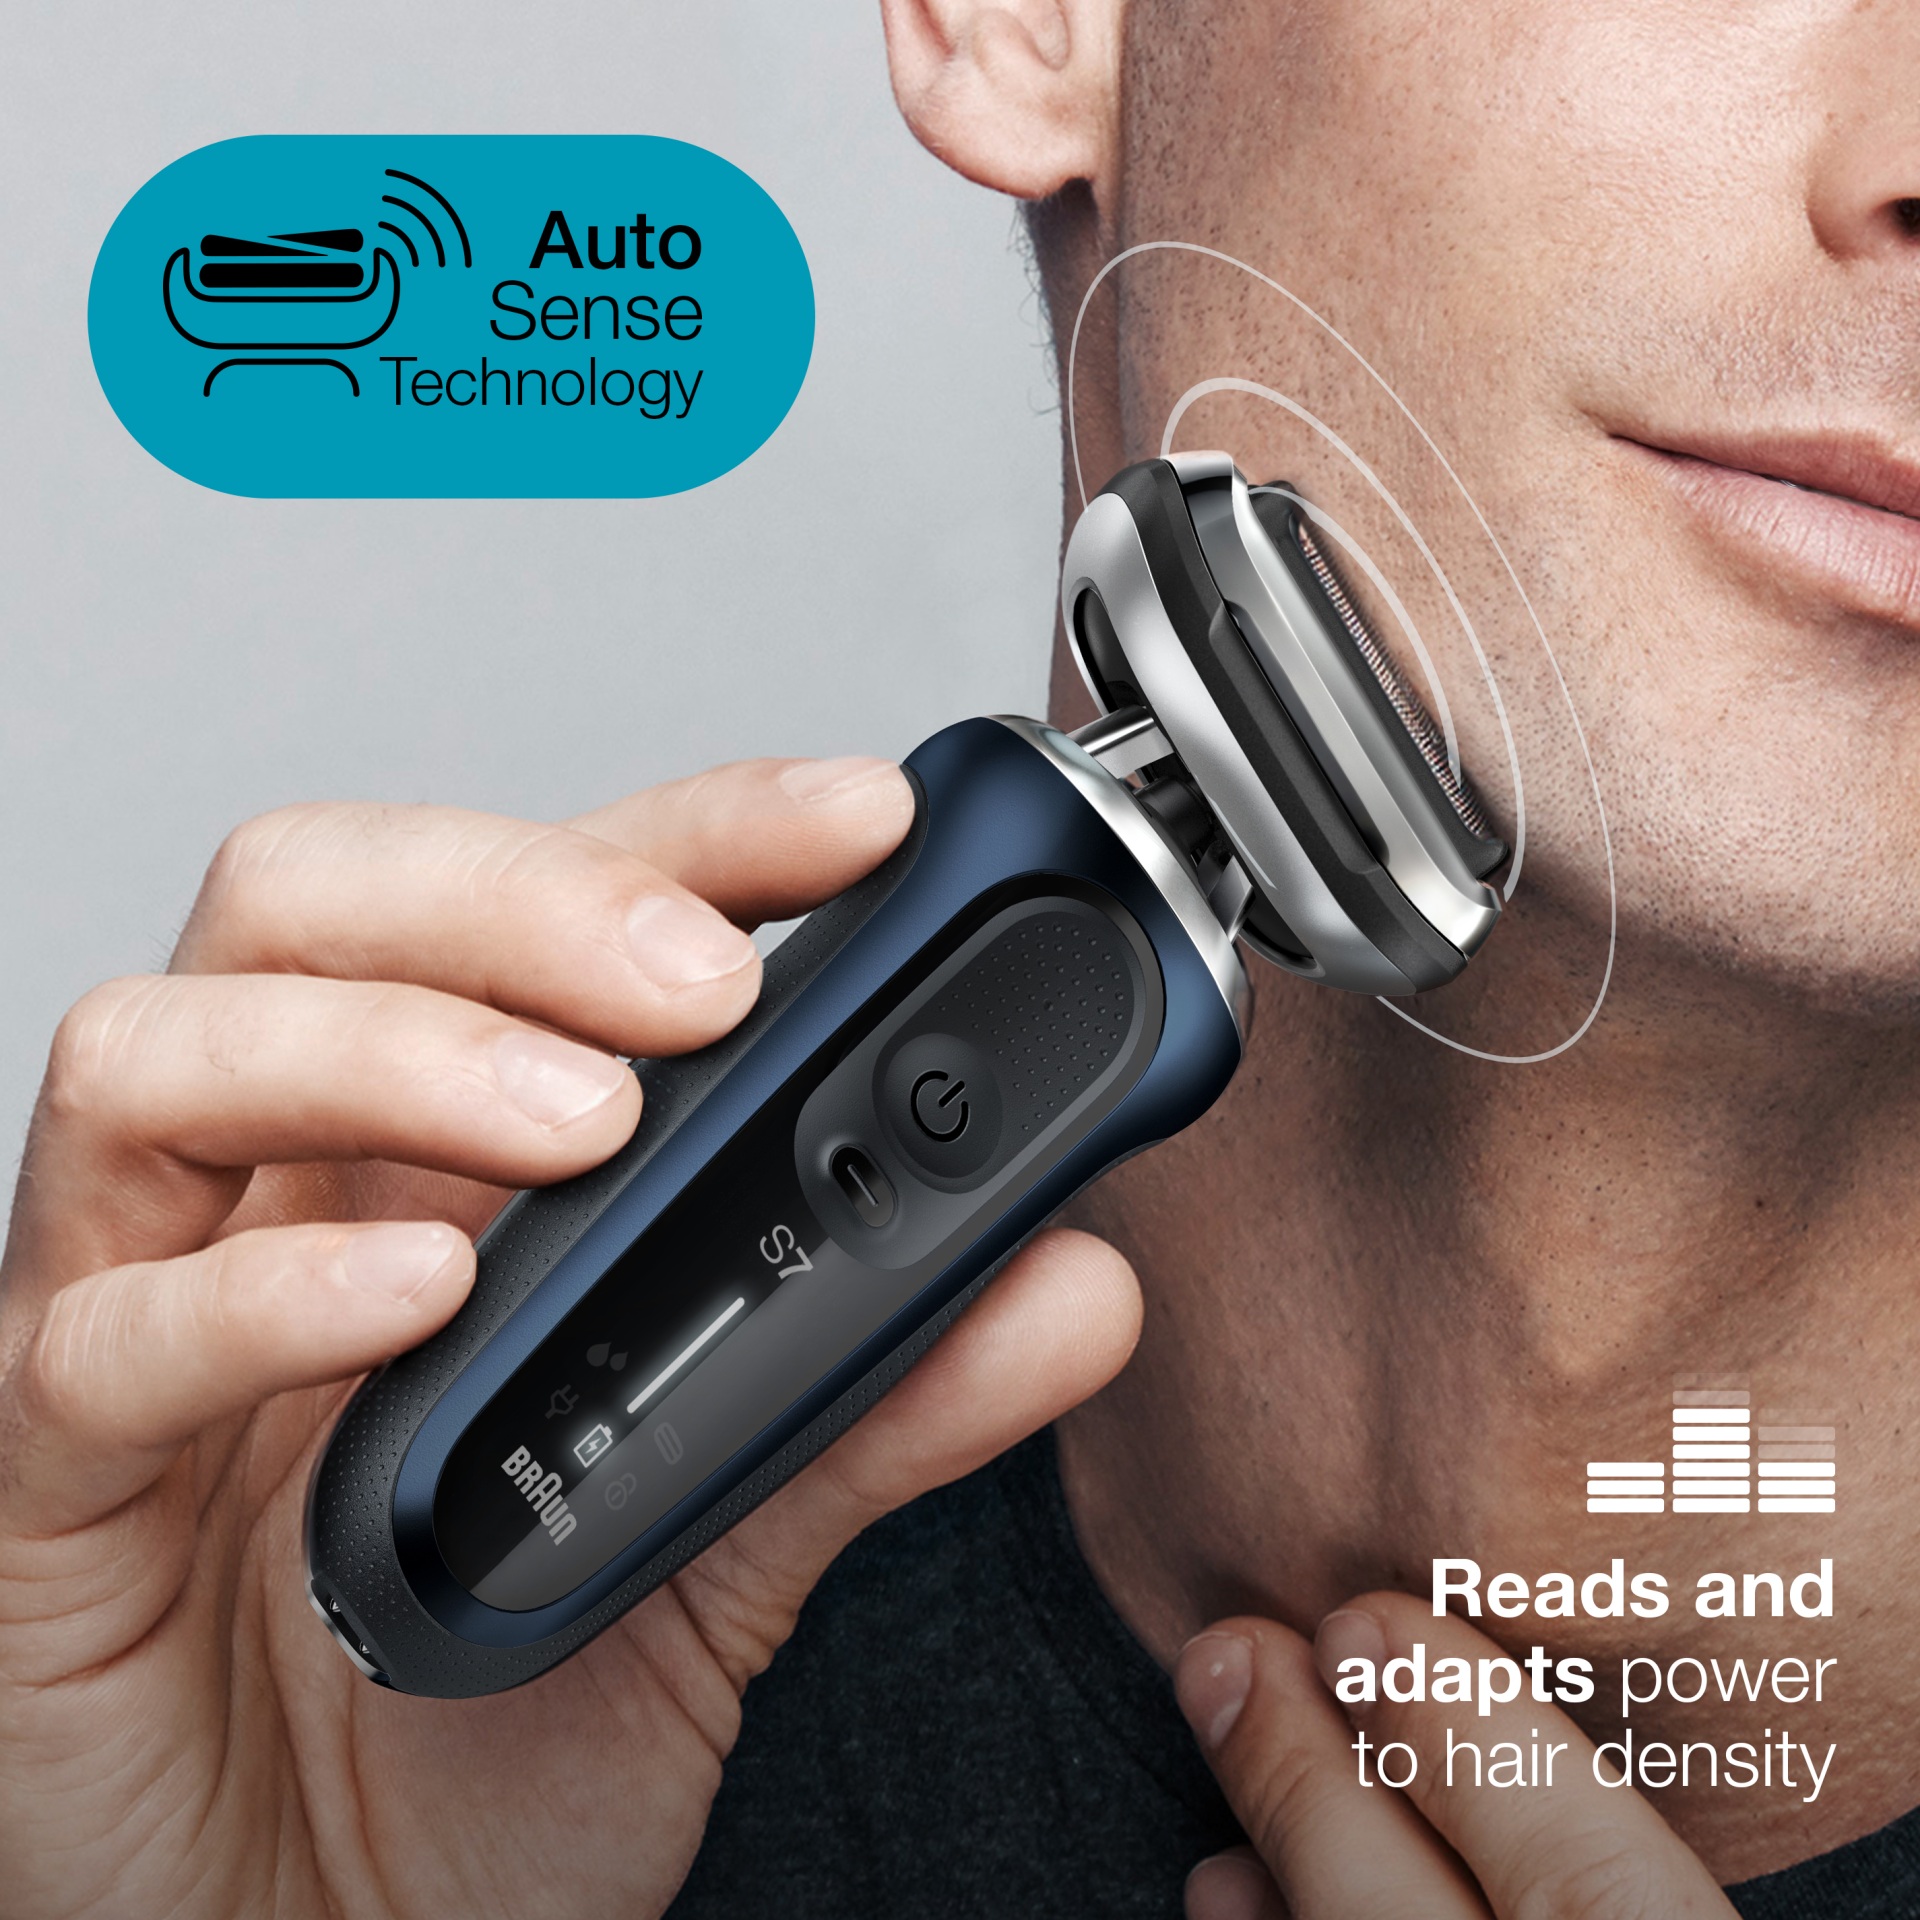 Auto Sense technology. Reads and adapts power to hair density.